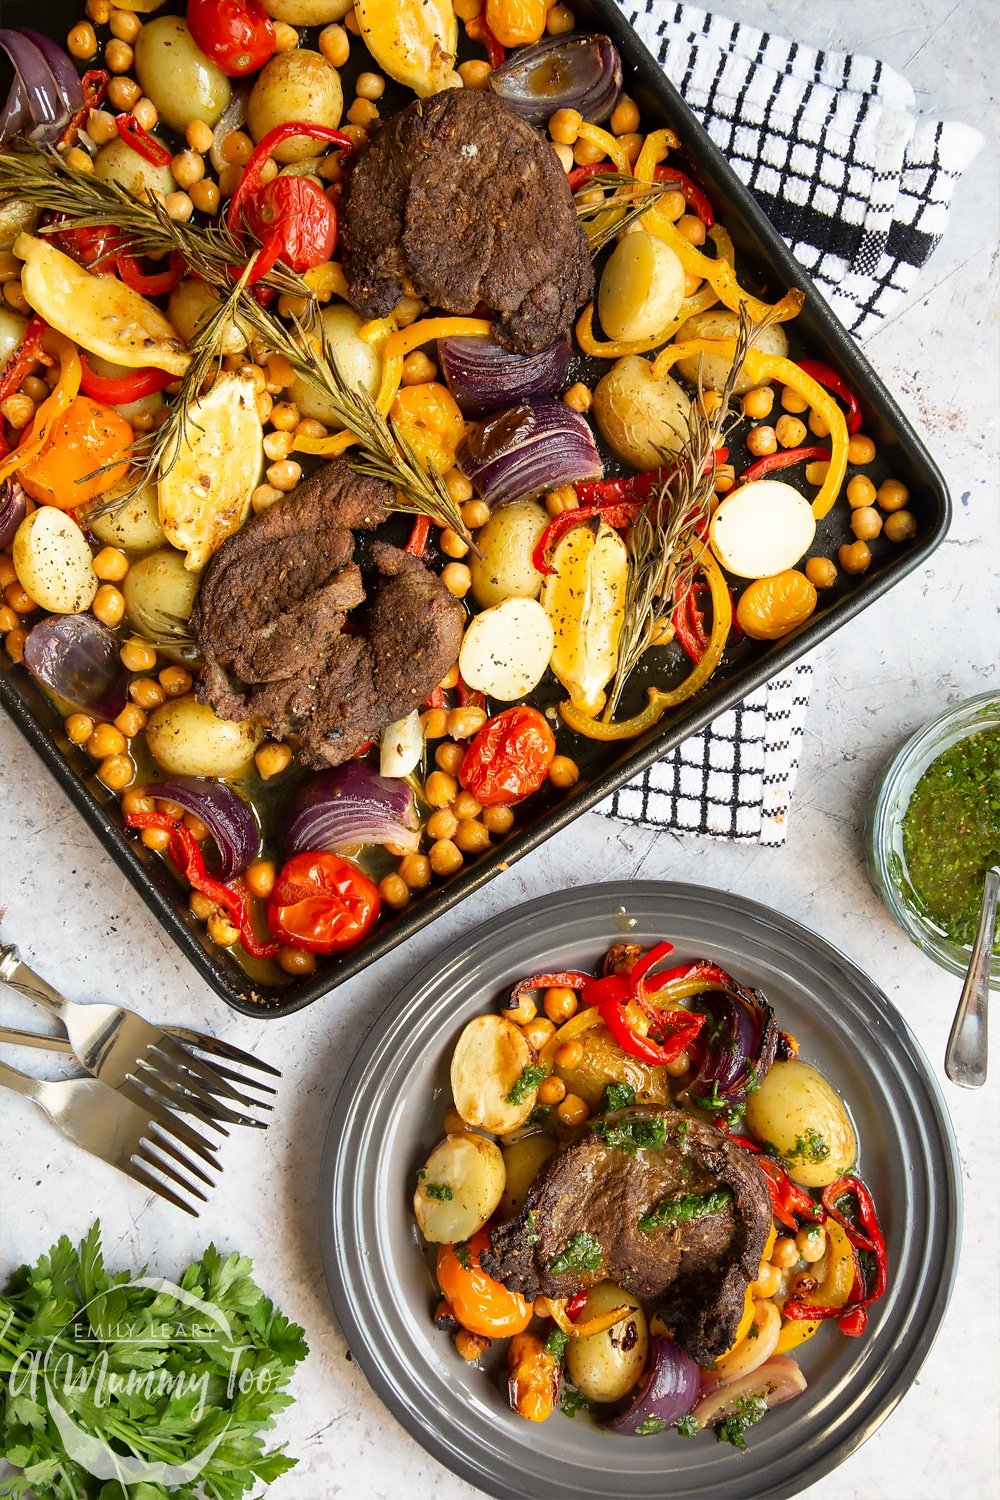 This lamb steak and veg sheet pan meal is easy to make and delicious 